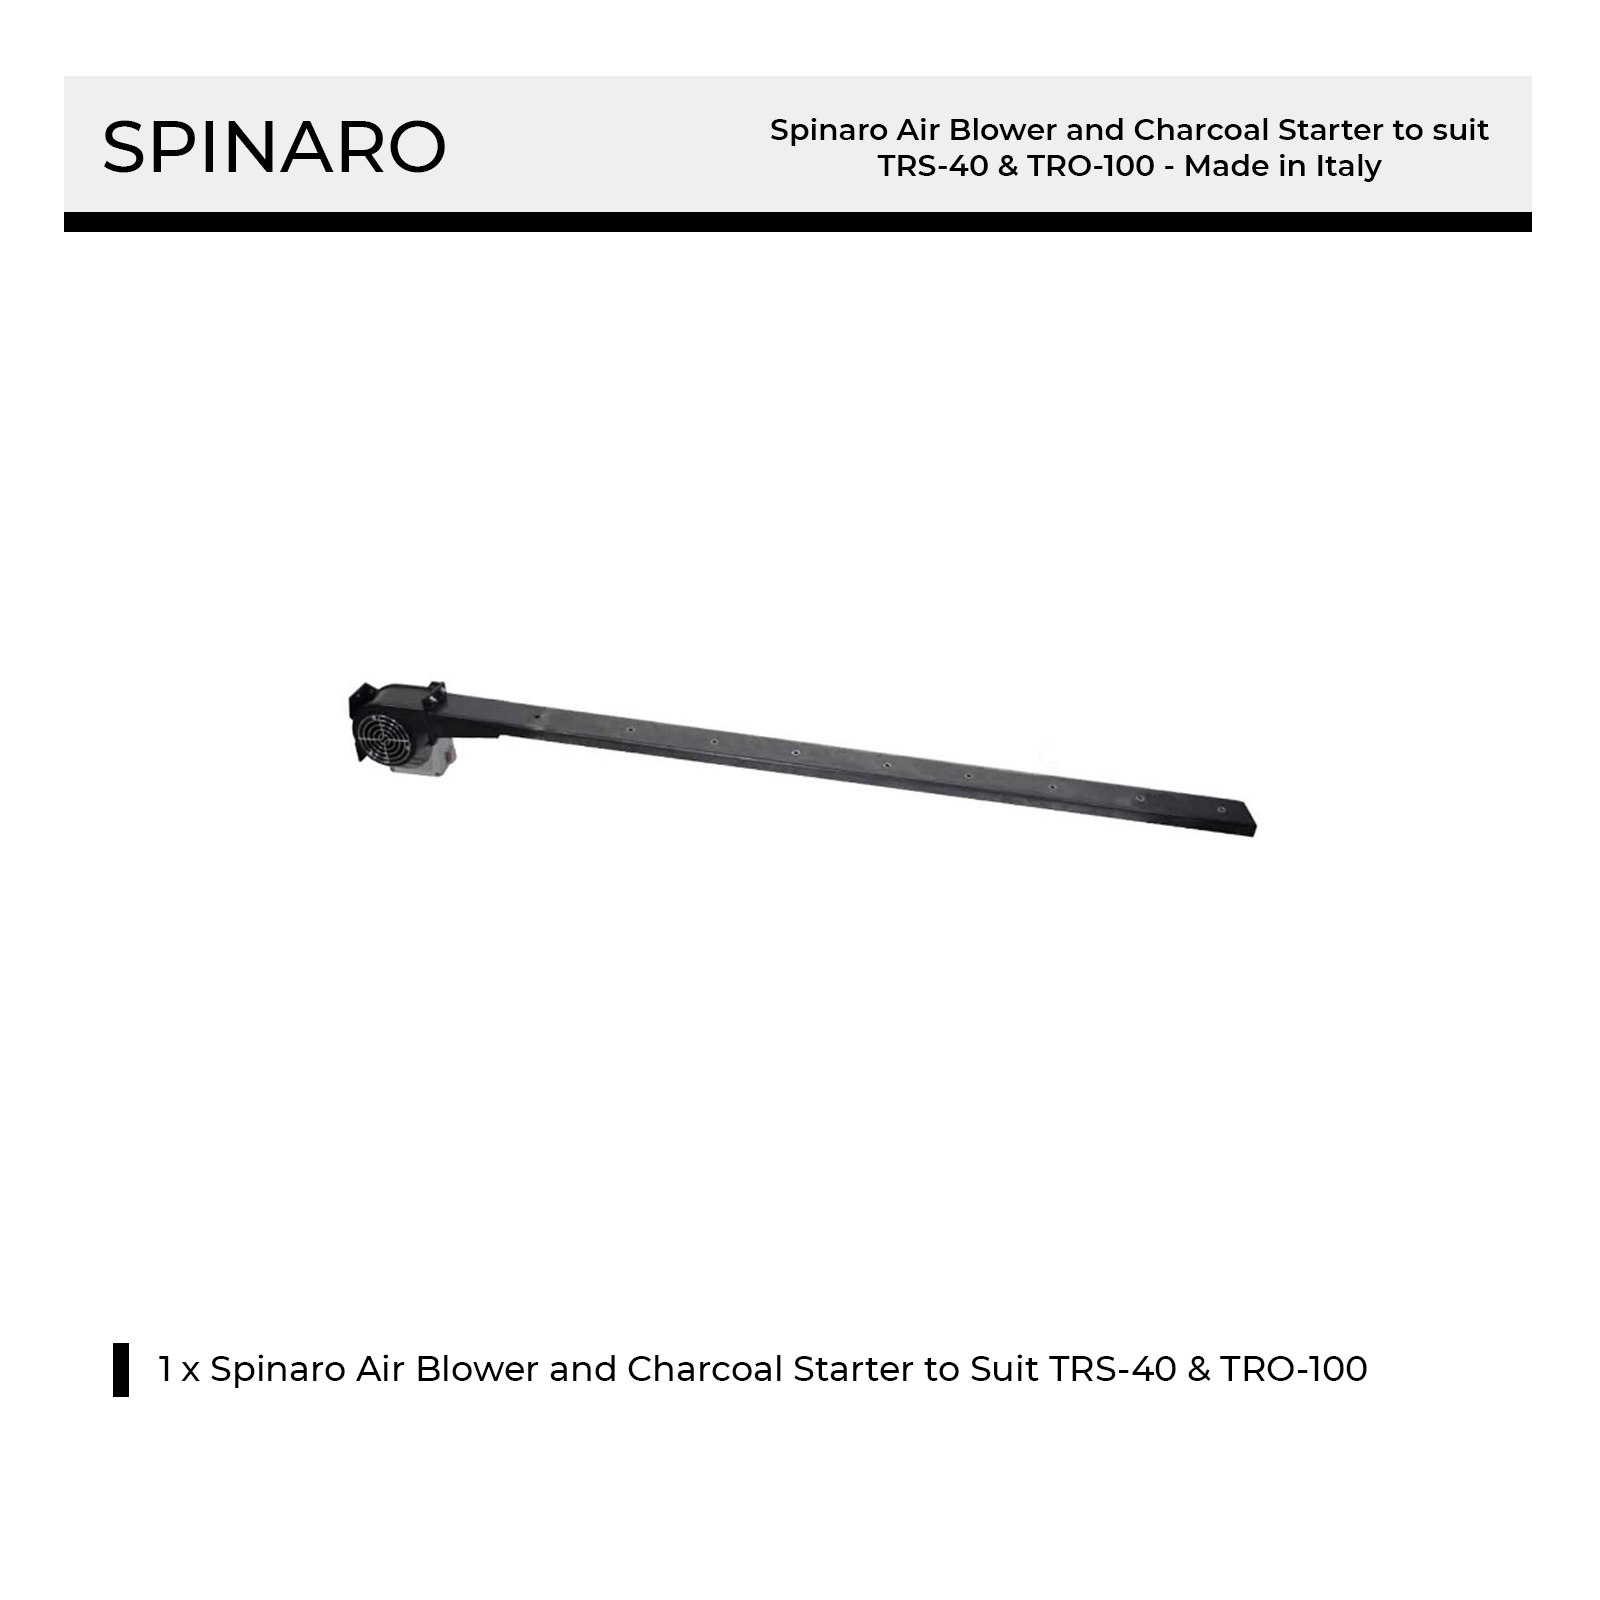 Spinaro Air Blower and Charcoal Starter to suit TRS-40 & TRO-100 - Made in Italy